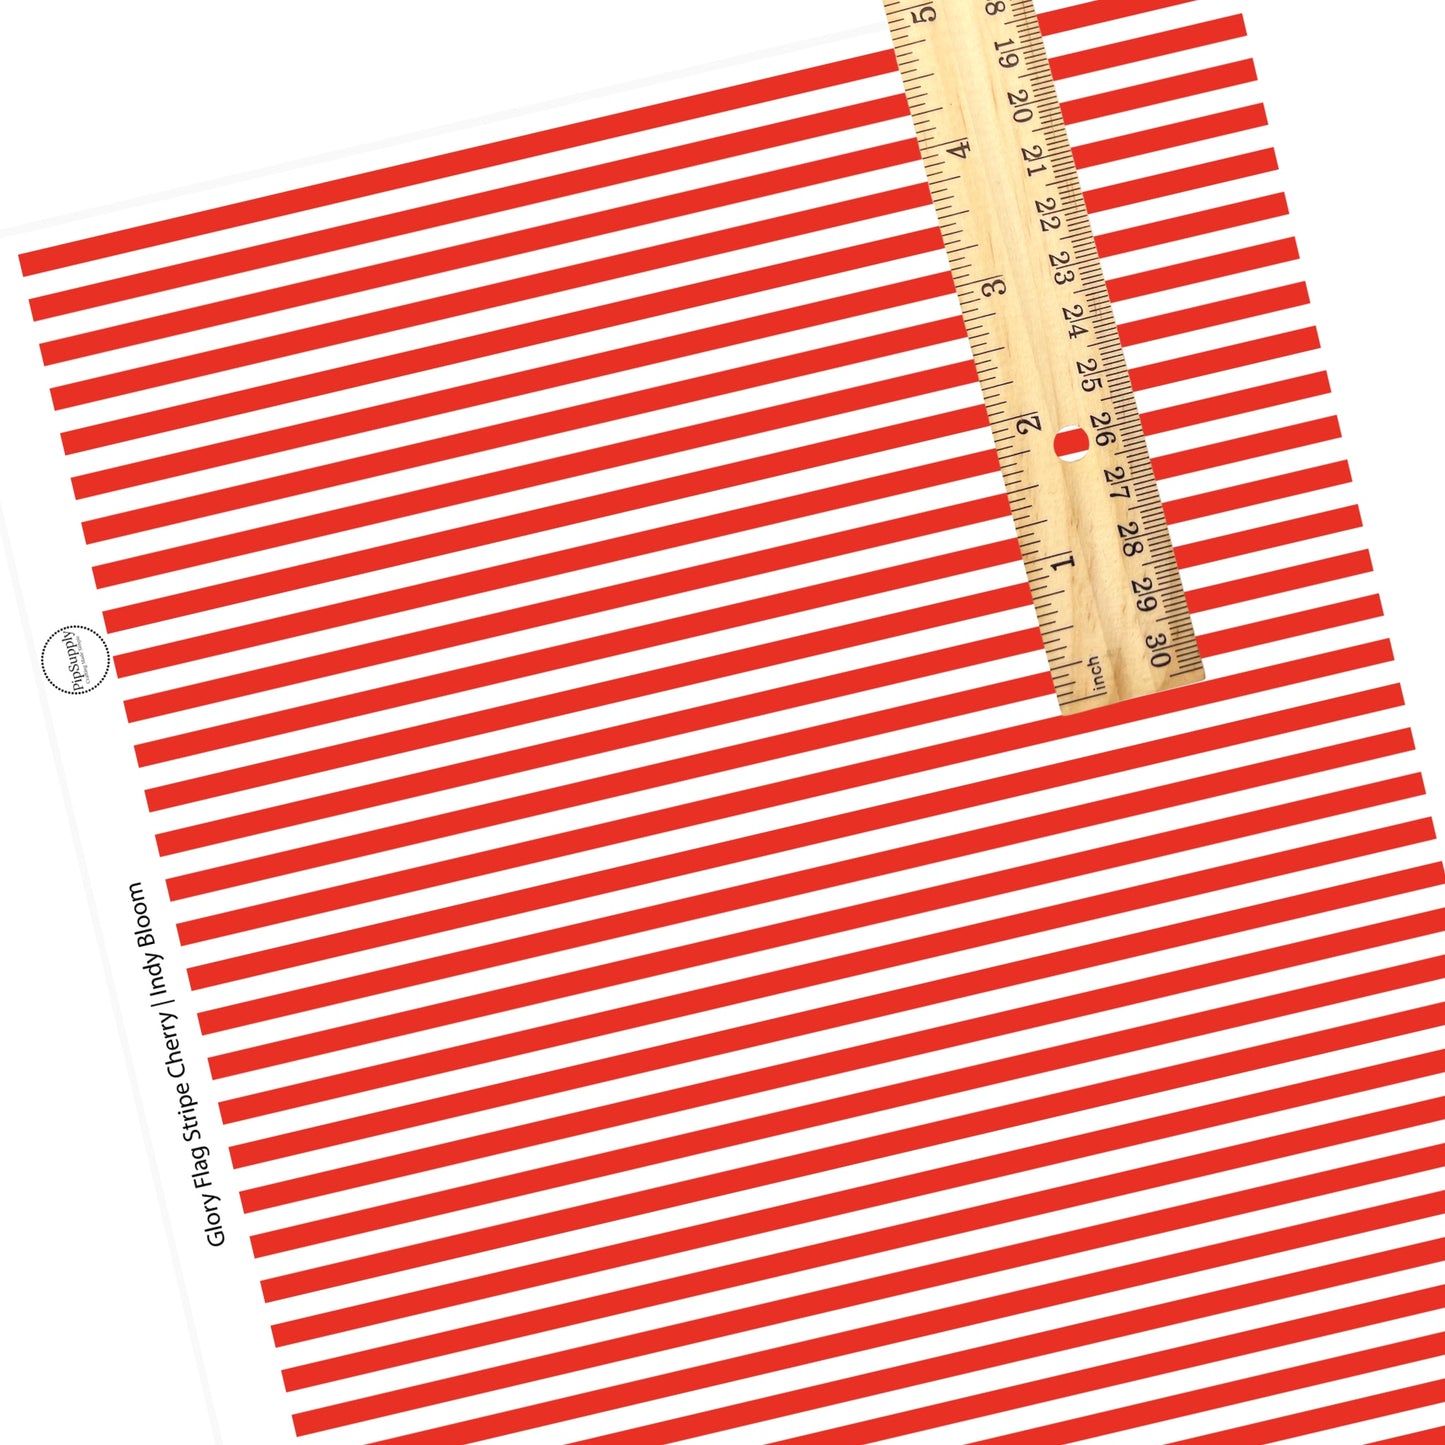 These 4th of July faux leather sheets contain the following design elements: patriotic white and red stripes. Our CPSIA compliant faux leather sheets or rolls can be used for all types of crafting projects.